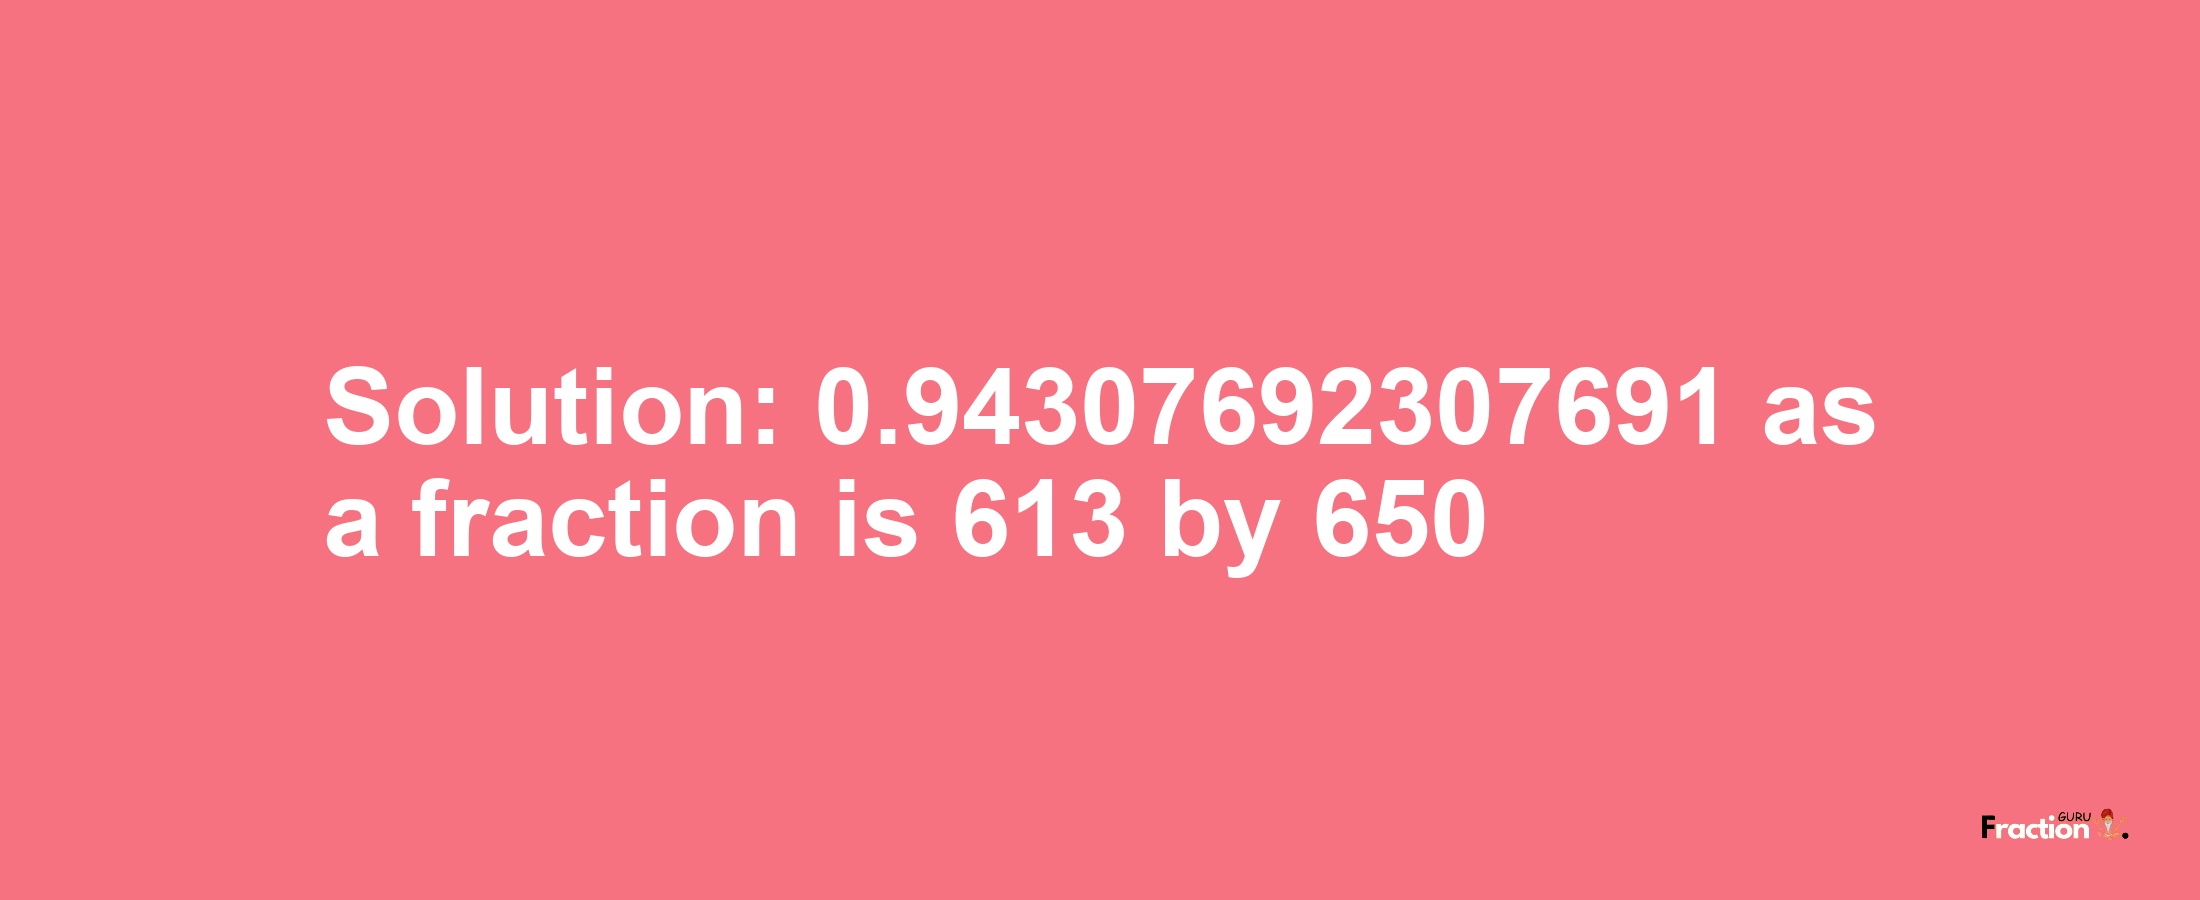 Solution:0.94307692307691 as a fraction is 613/650